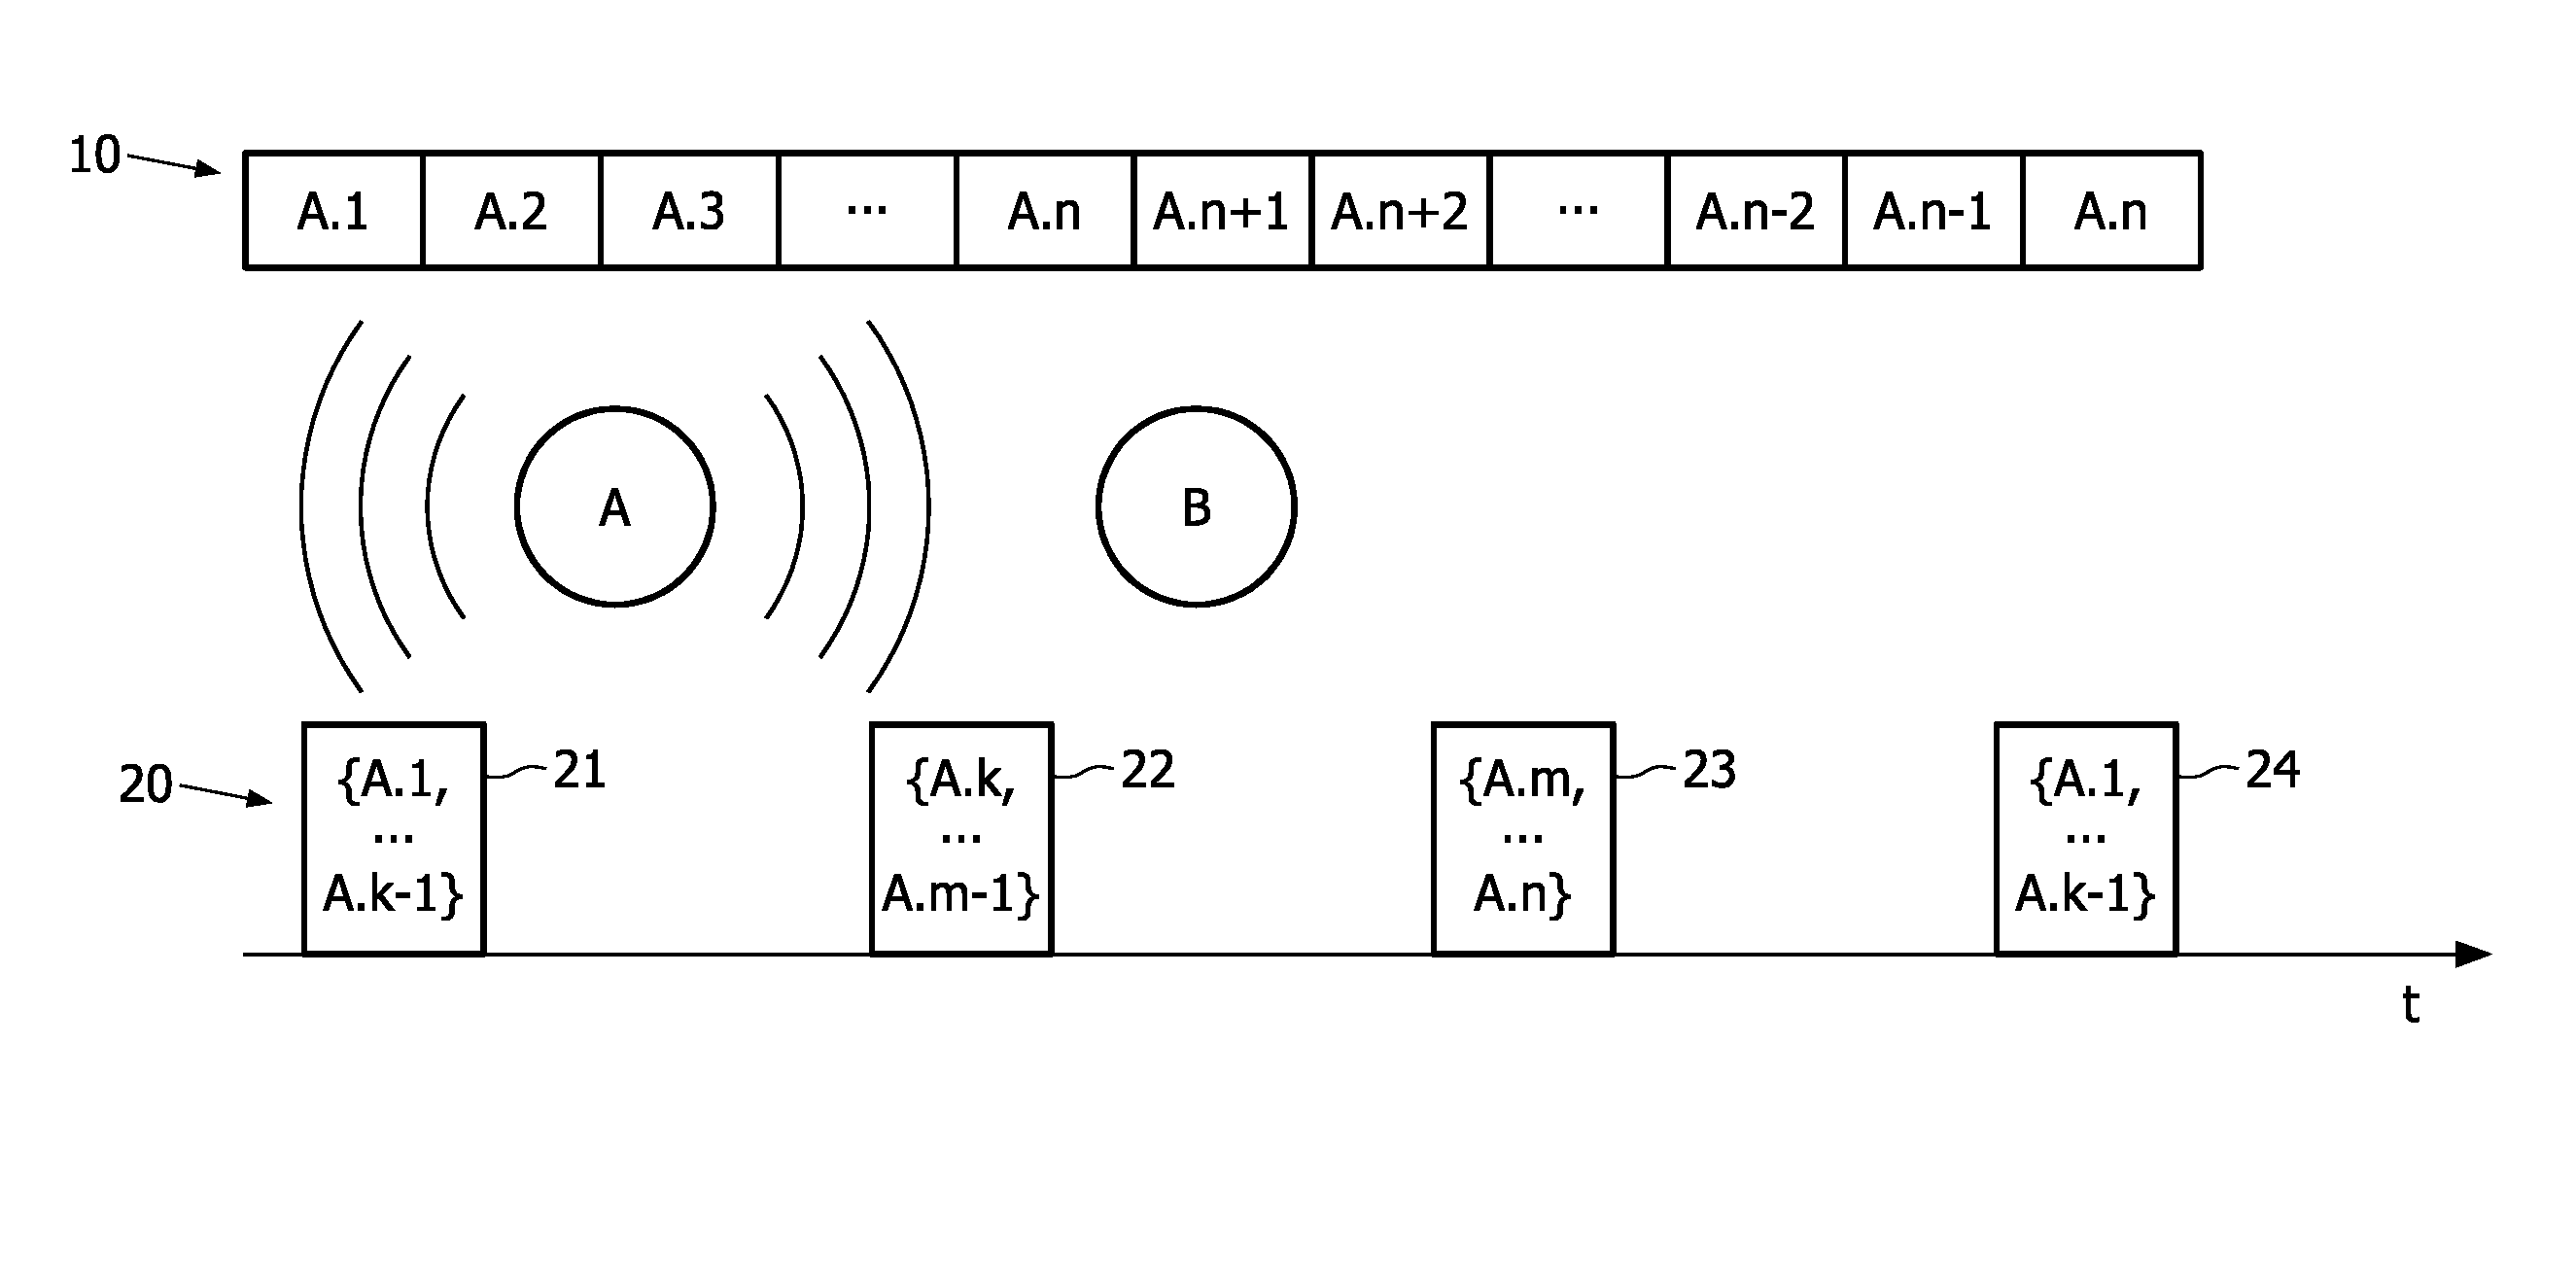 Method of generating report messages in a network